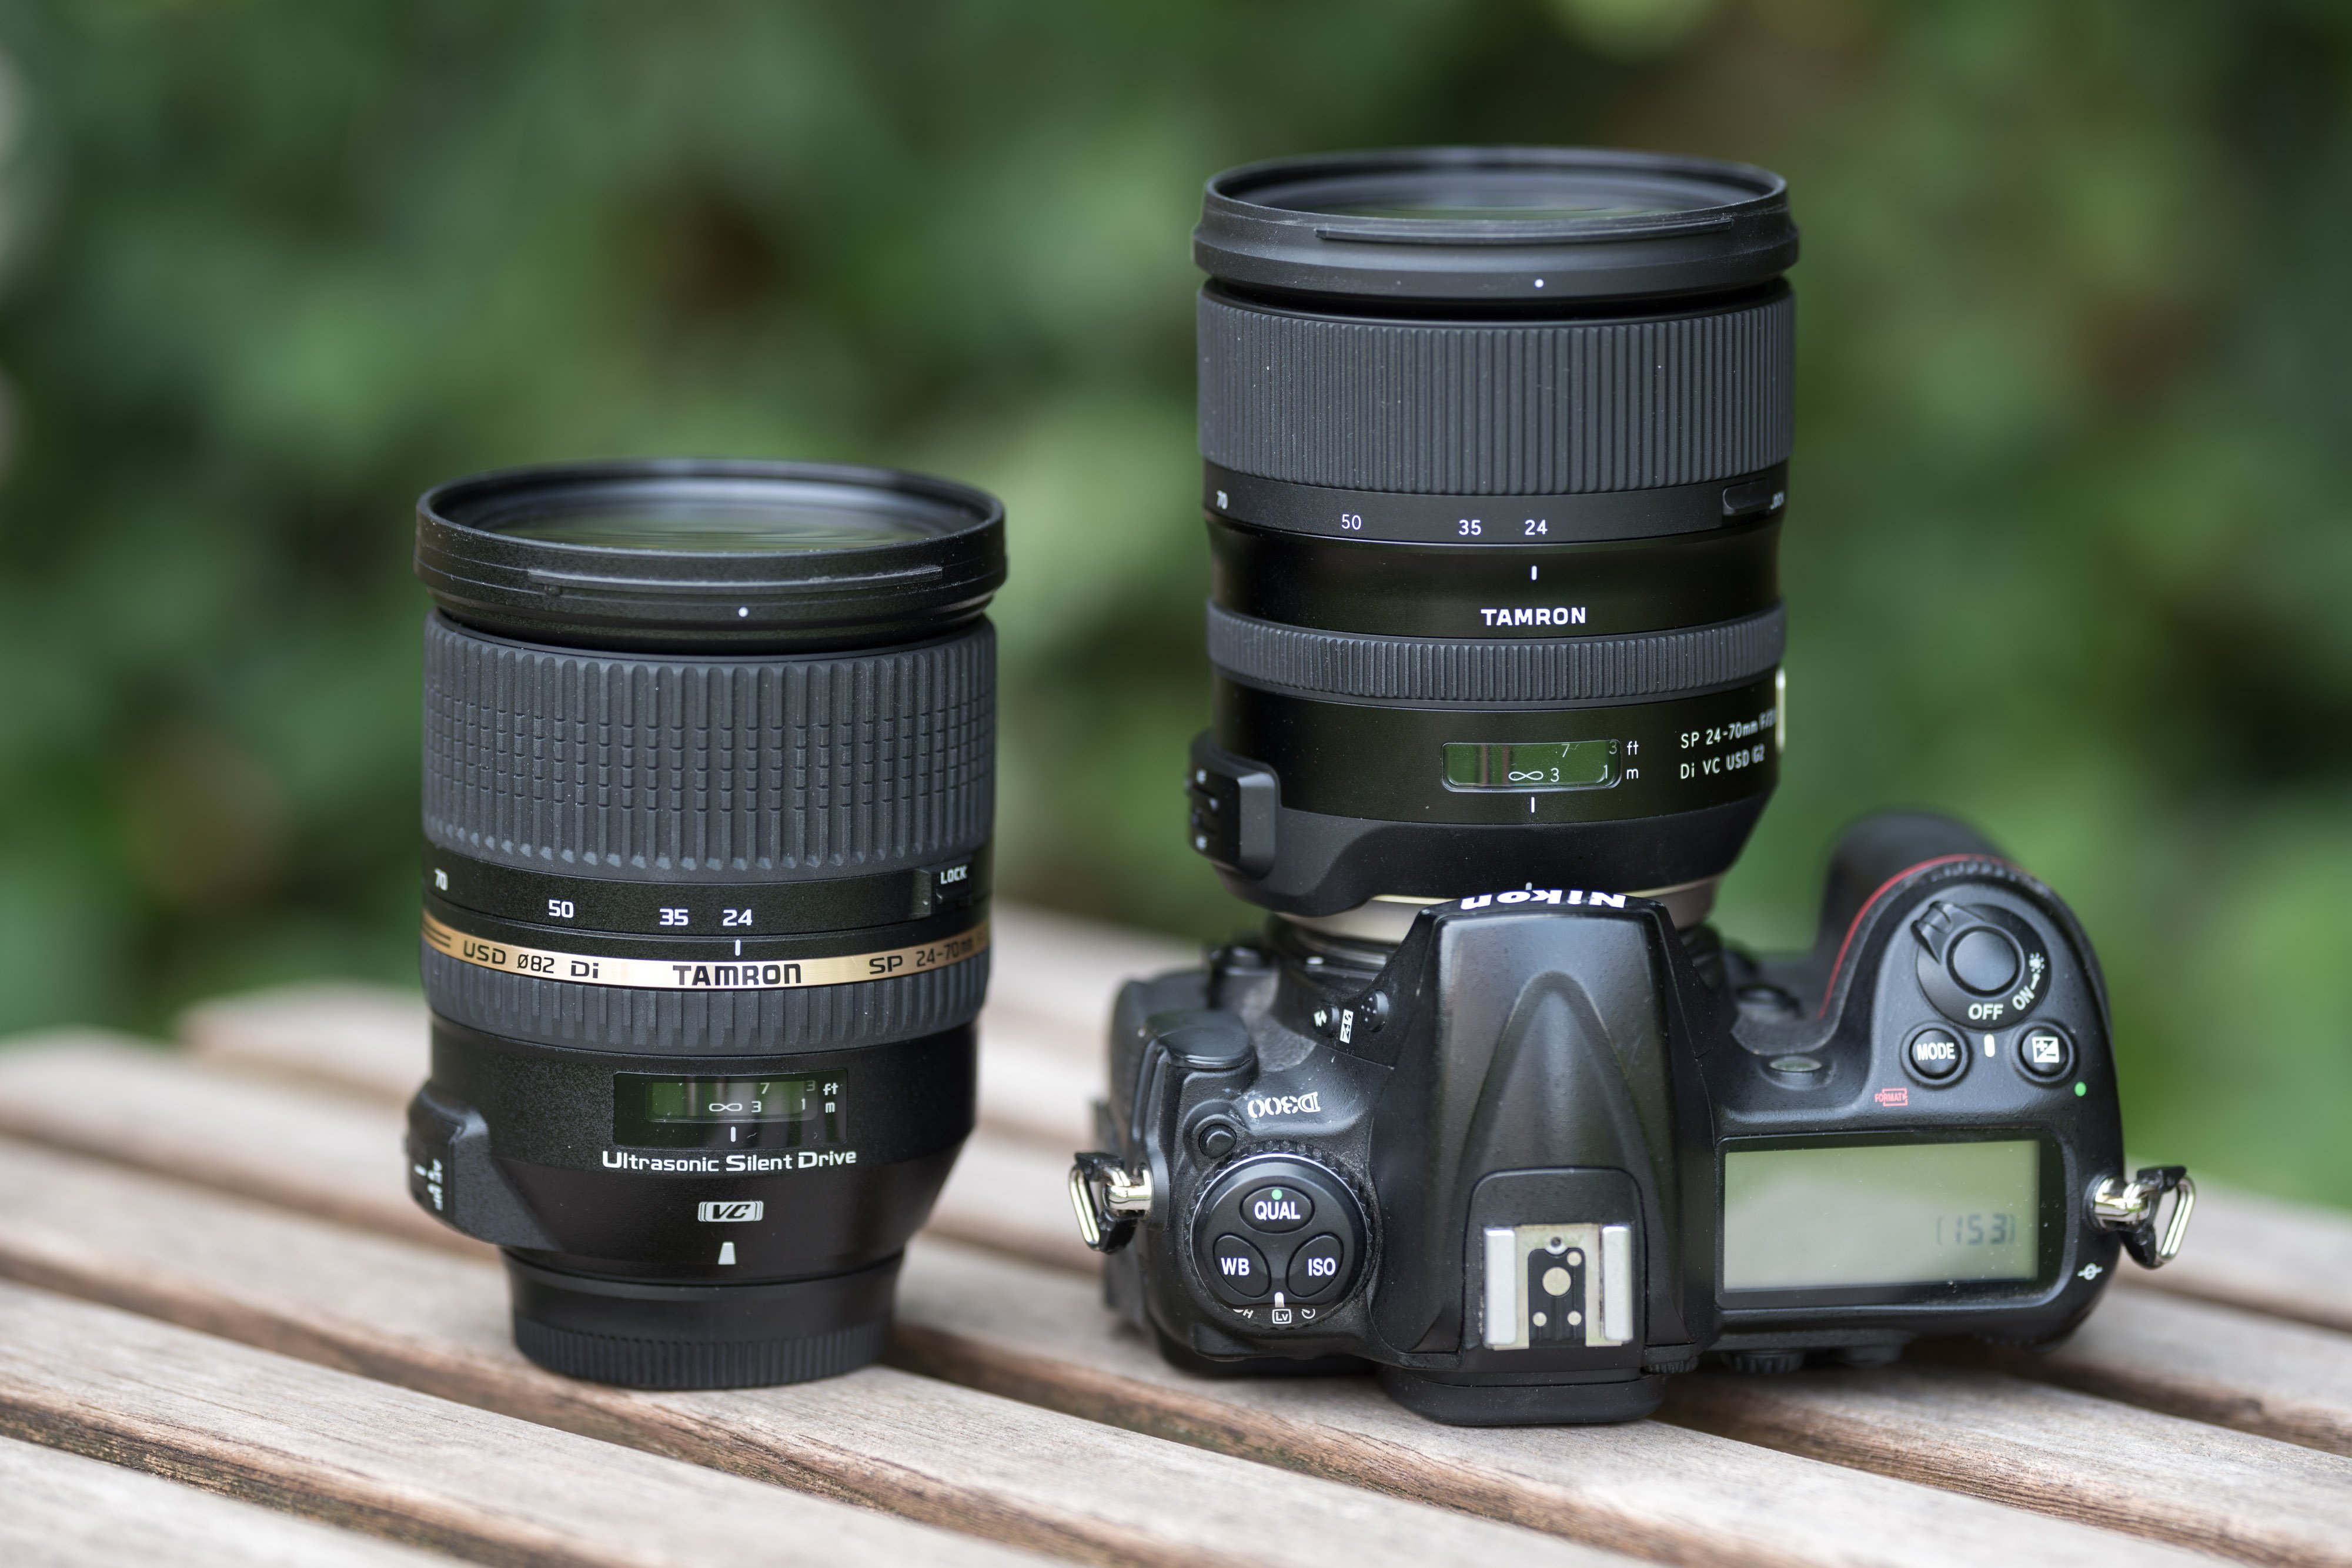 Tamron 24-70mm f2.8 VC G2 review | Cameralabs